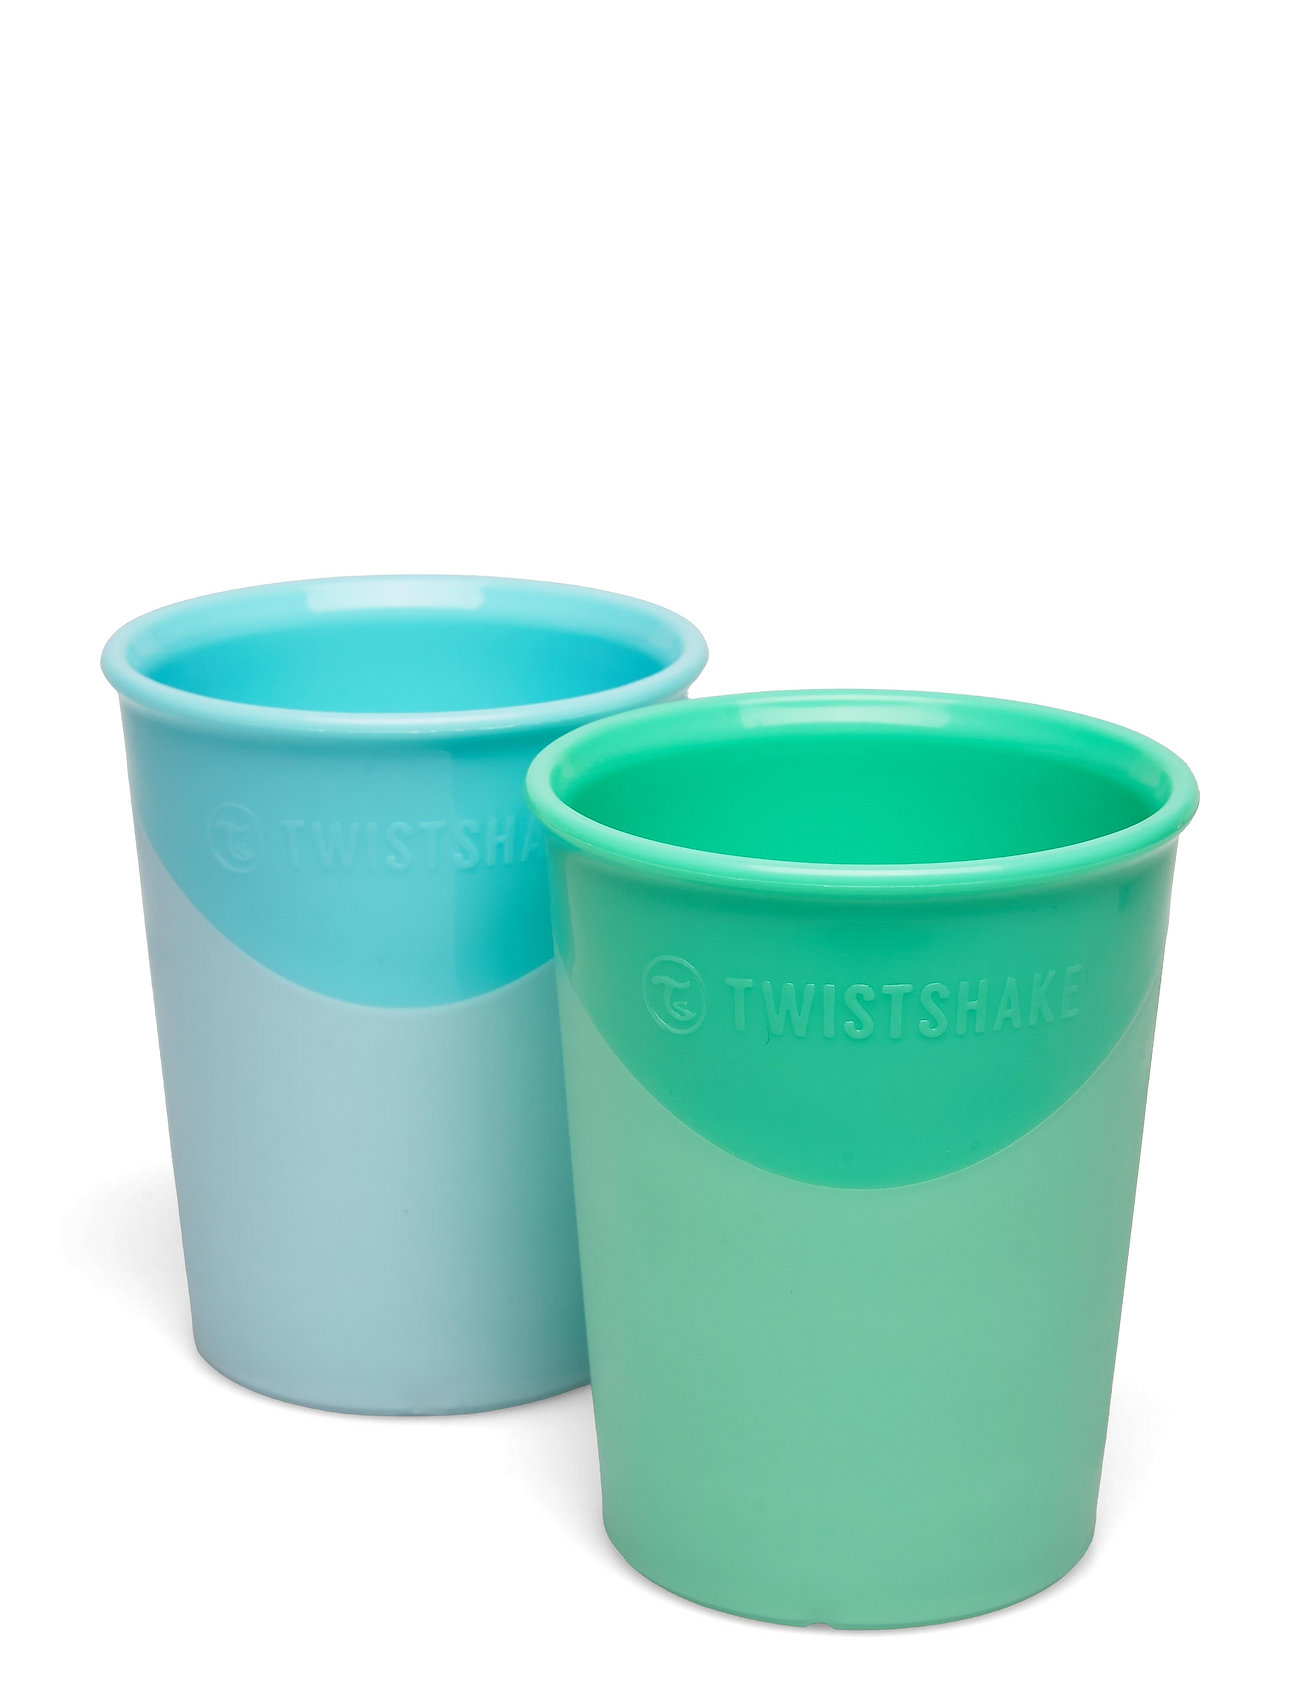 Twistshake 2X Cup 170Ml 6+M Pastel Blue Green Home Meal Time Cups & Mugs Cups Green Twistshake